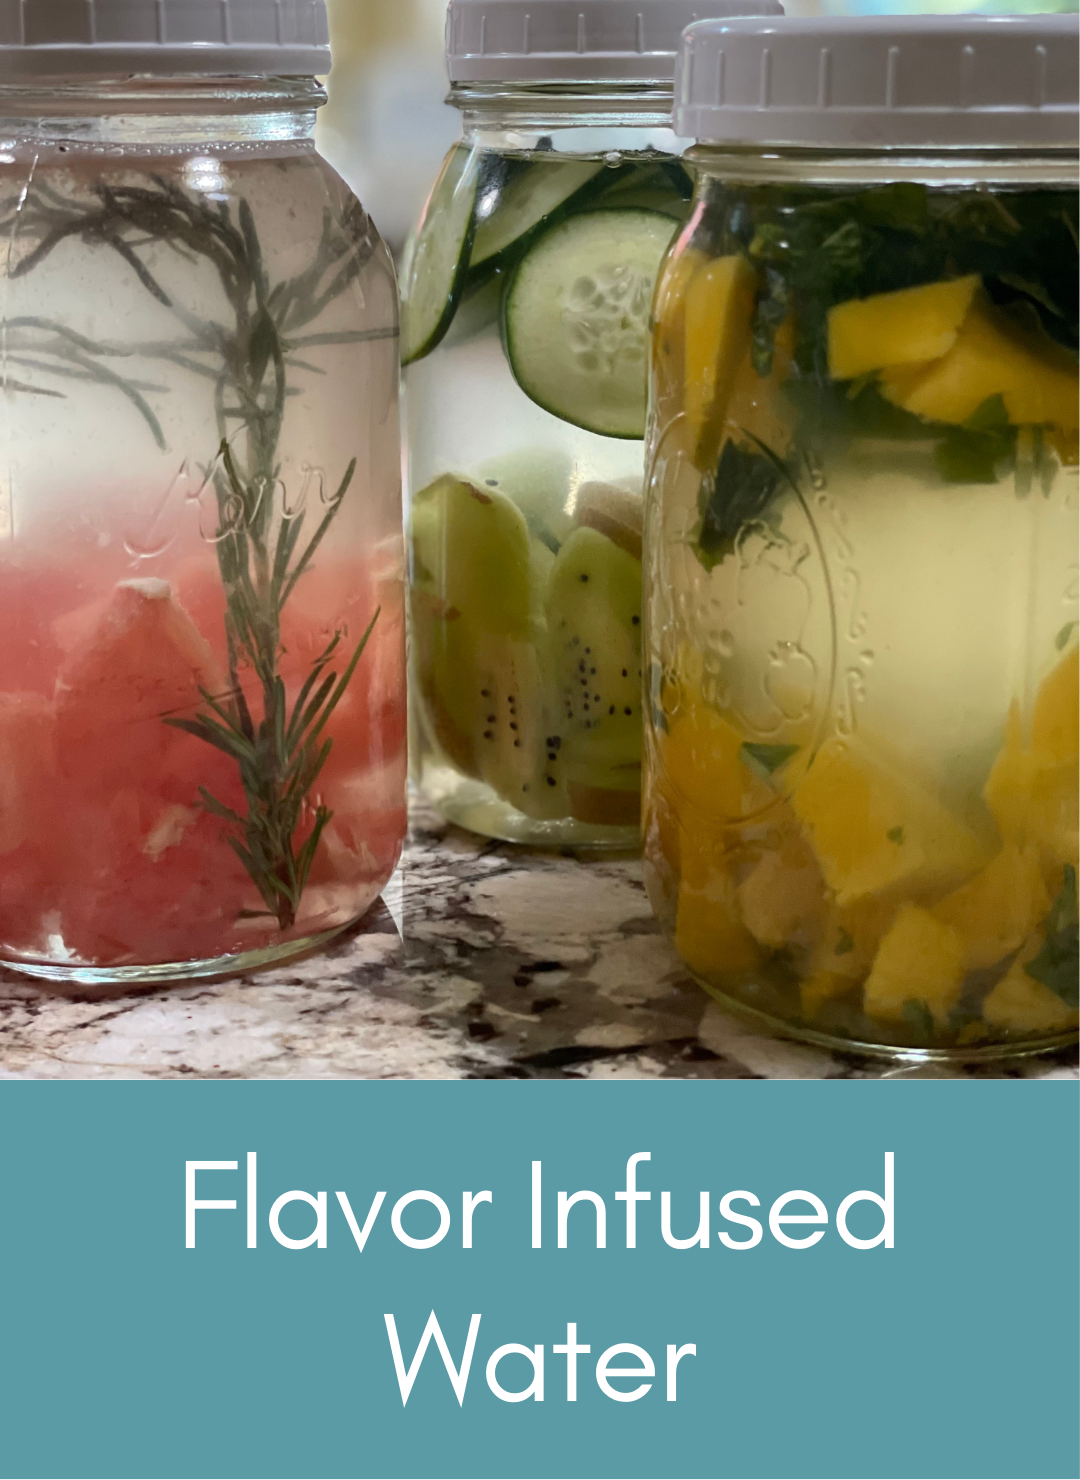 Plant based sugar-free flavor infused water using fresh fruit and herbs to help you stay hydrated Picture with link to recipe